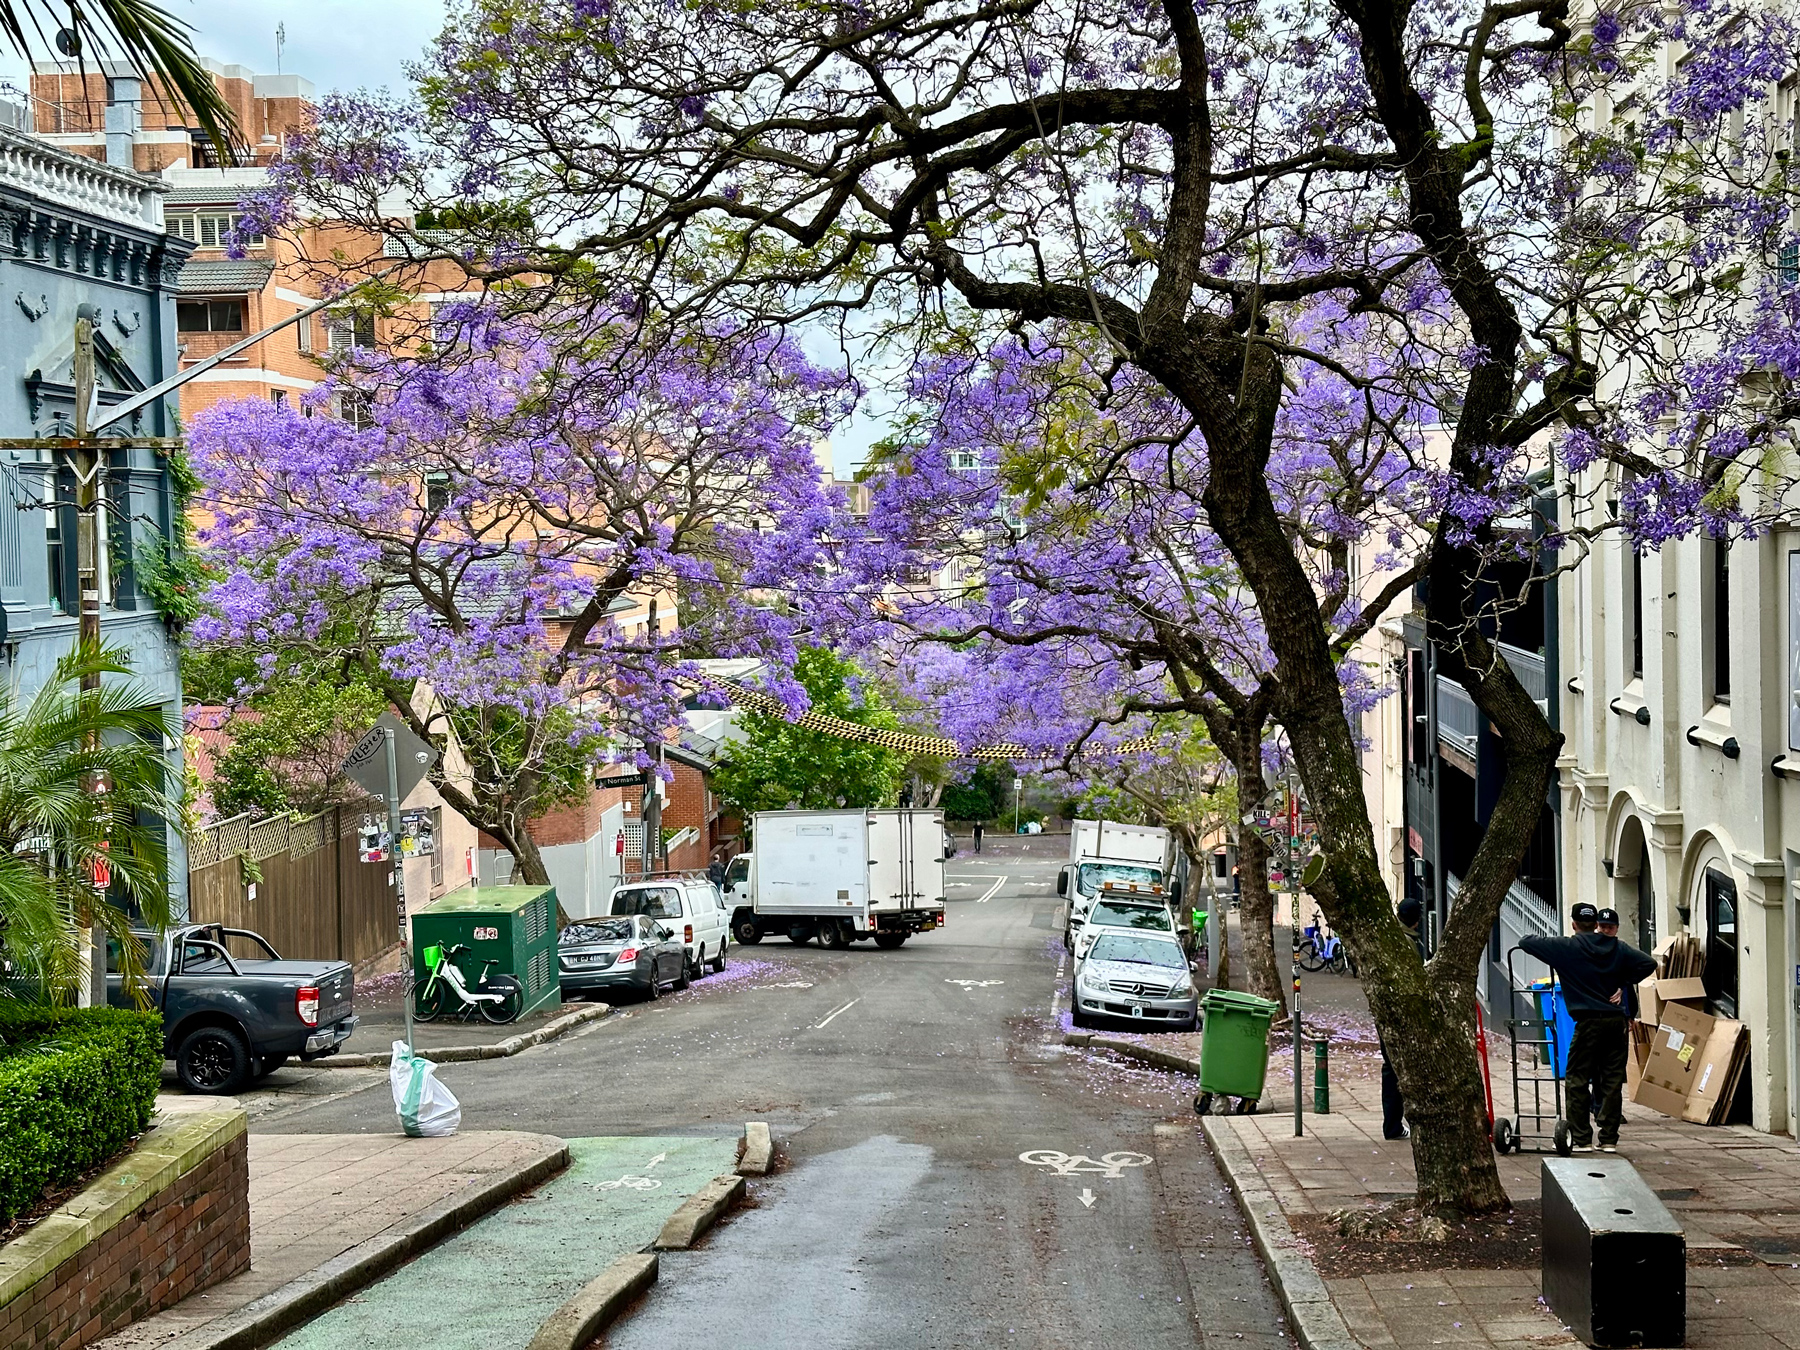 Trees with bright purple blossoms lining a small street